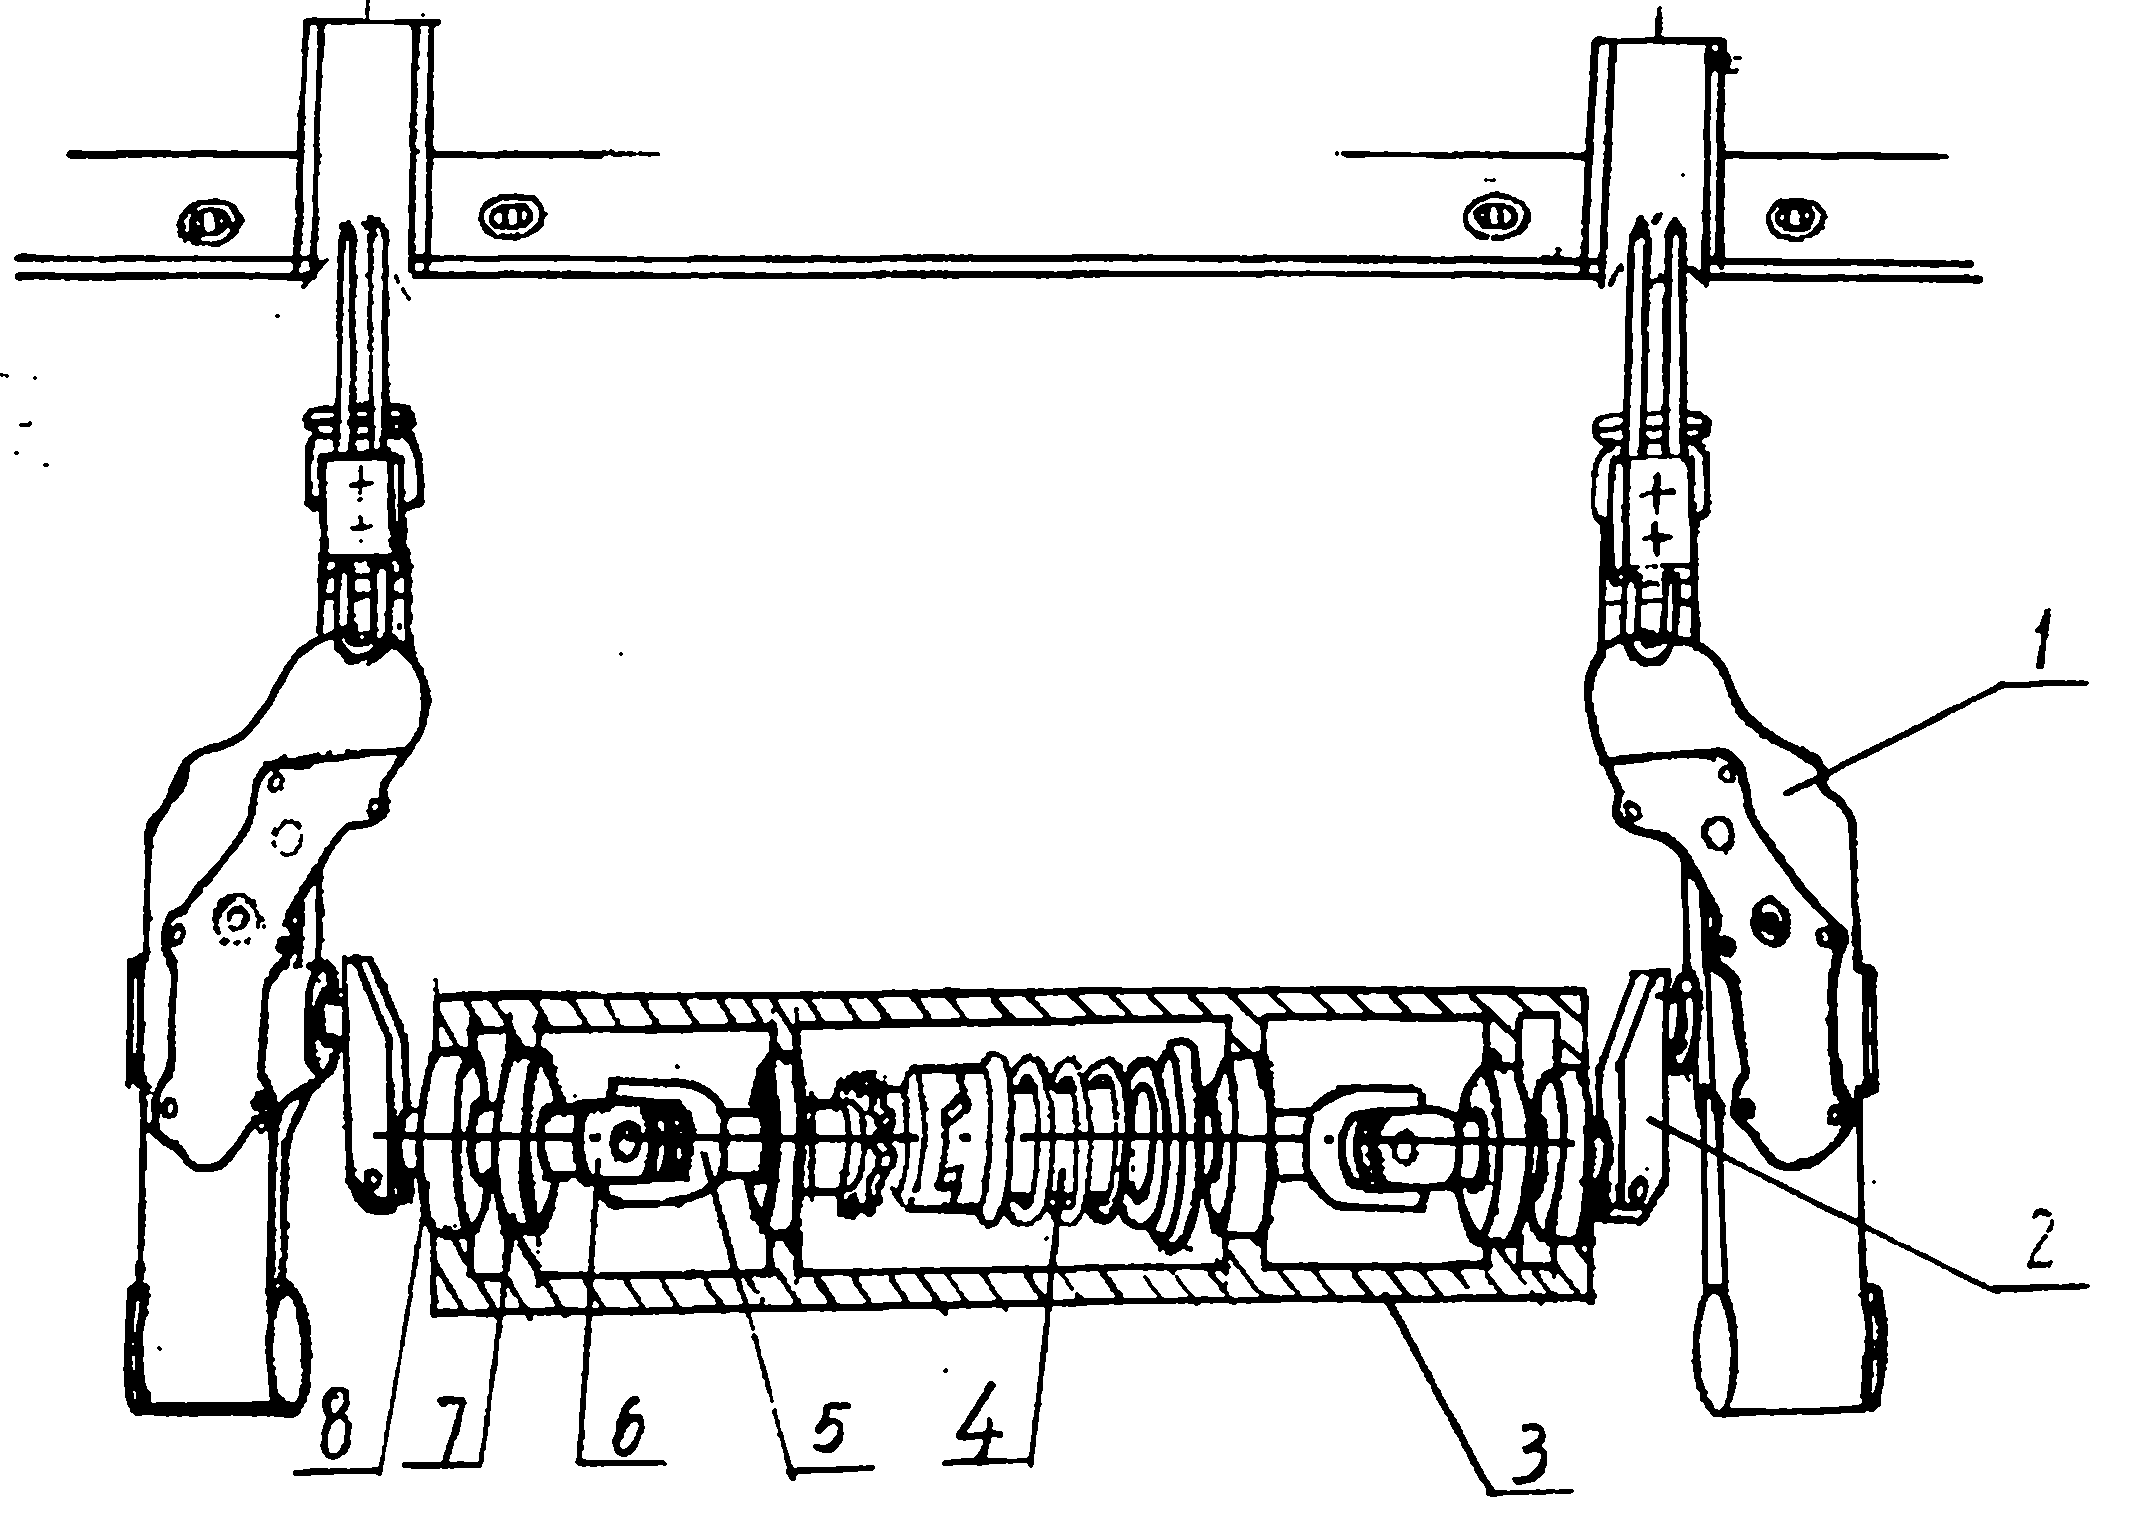 Wide- and narrow-row rice transplanting mechanism